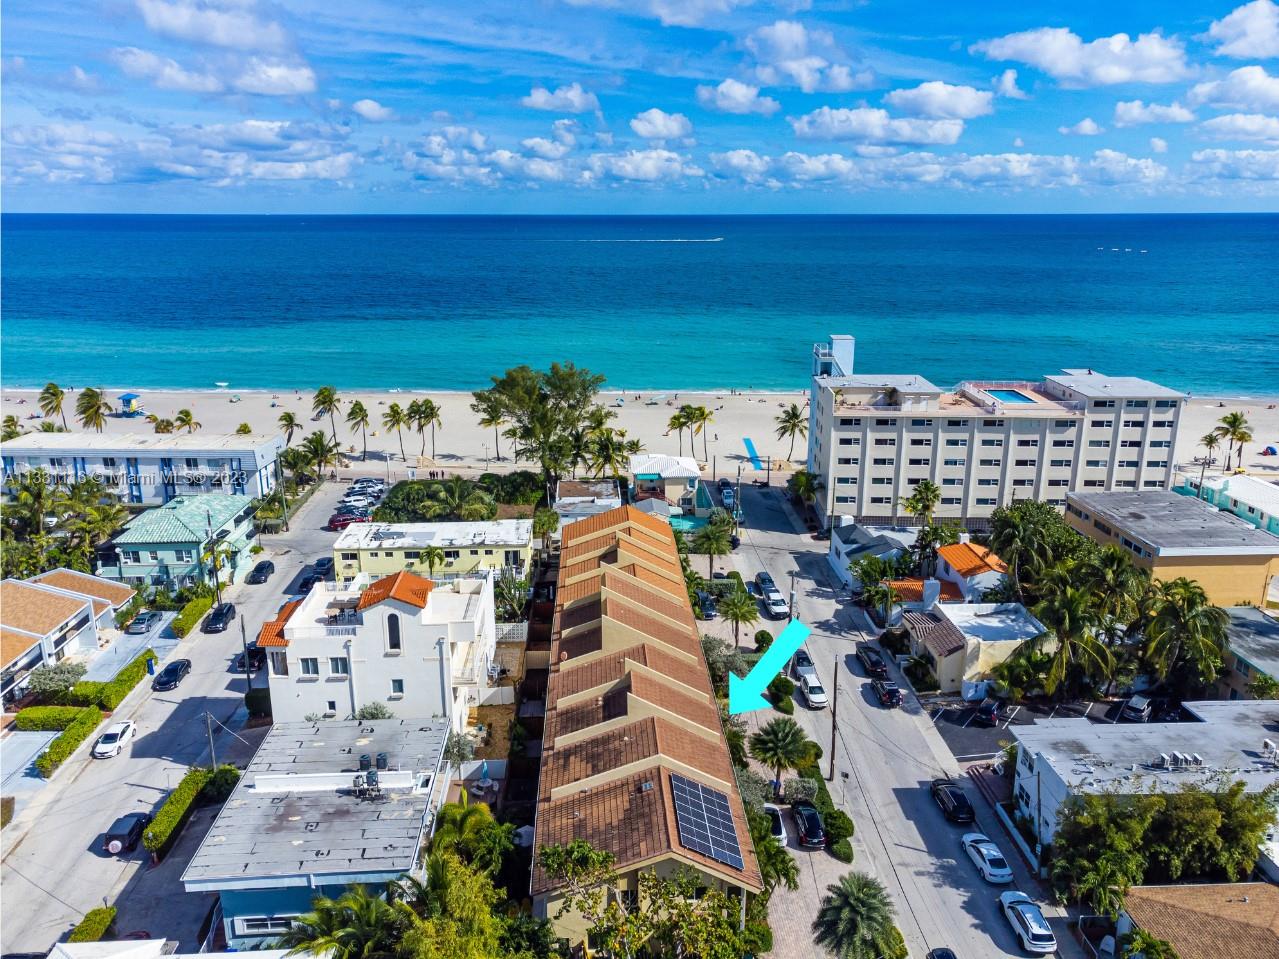 The only townhouse on Hollywood Beach under $1,000,000 right in the middle of the Ocean and Intracoastal. It doesn't get better than this!